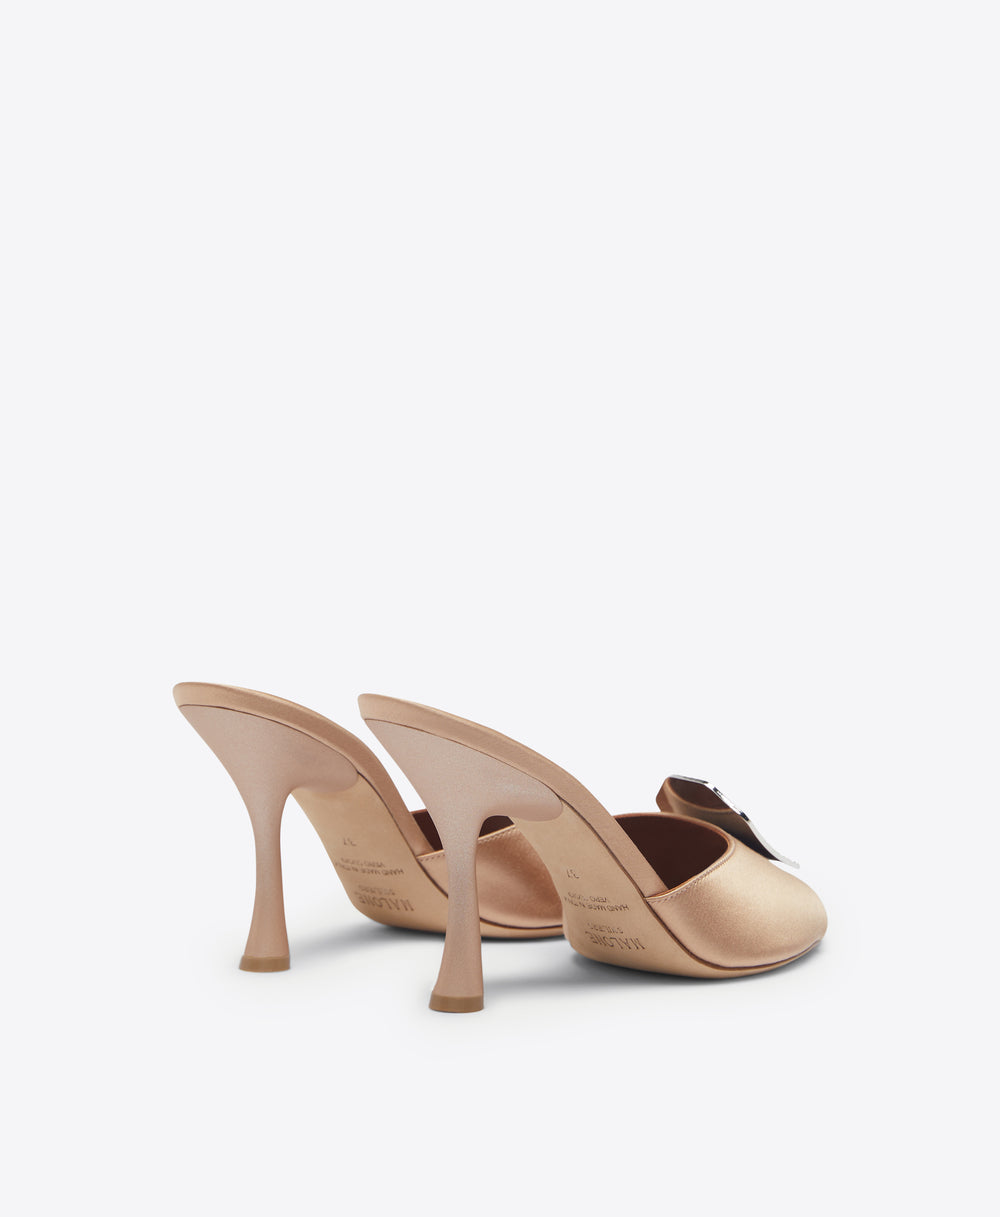 Malone Souliers Josia 90mm Sepia Satin Heeled Sandals